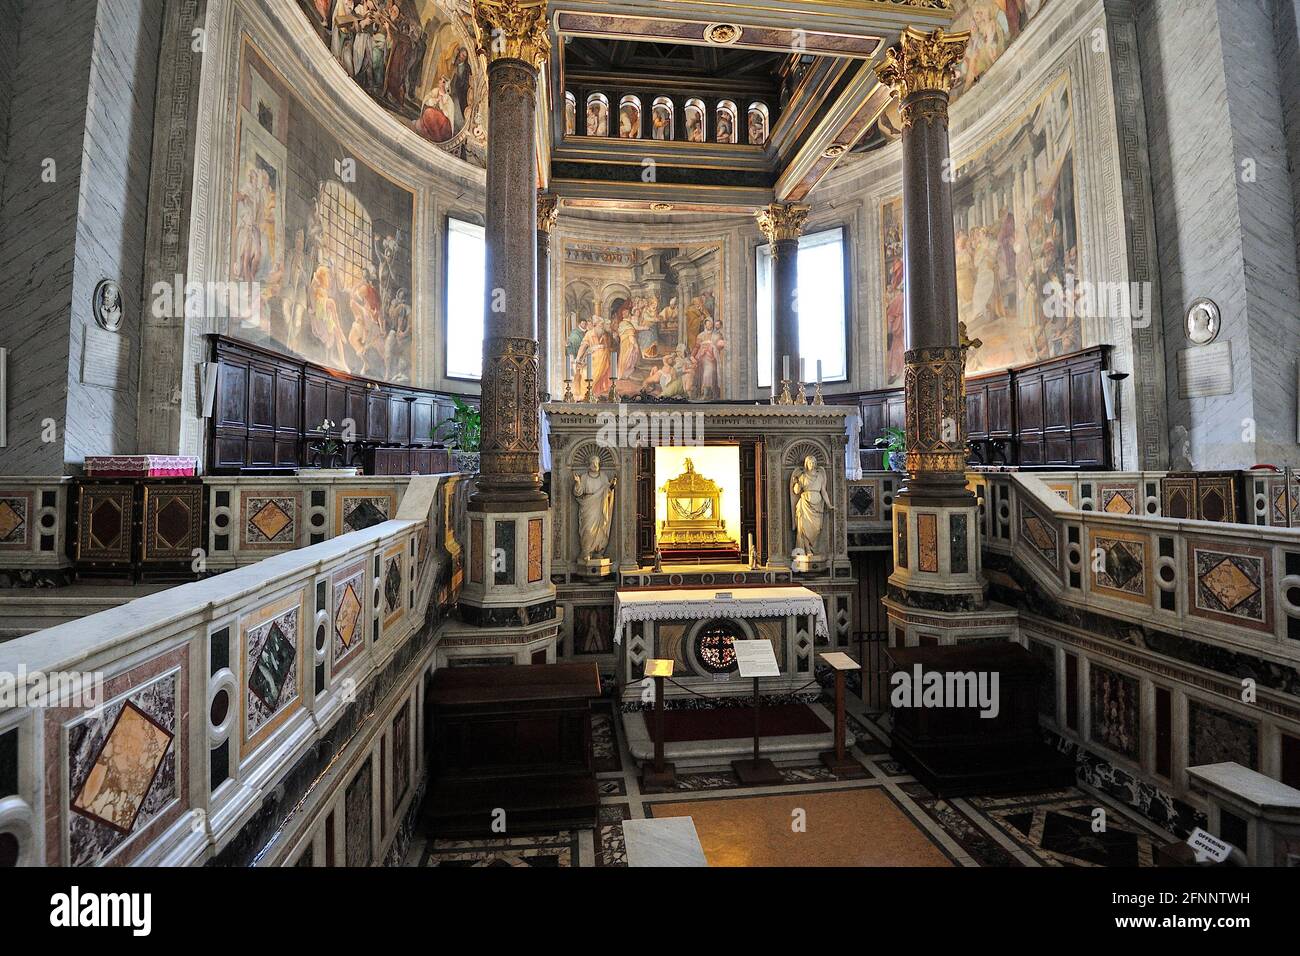 Italy, Rome, basilica of San Pietro in Vincoli (St. Peter in Chains) Stock Photo